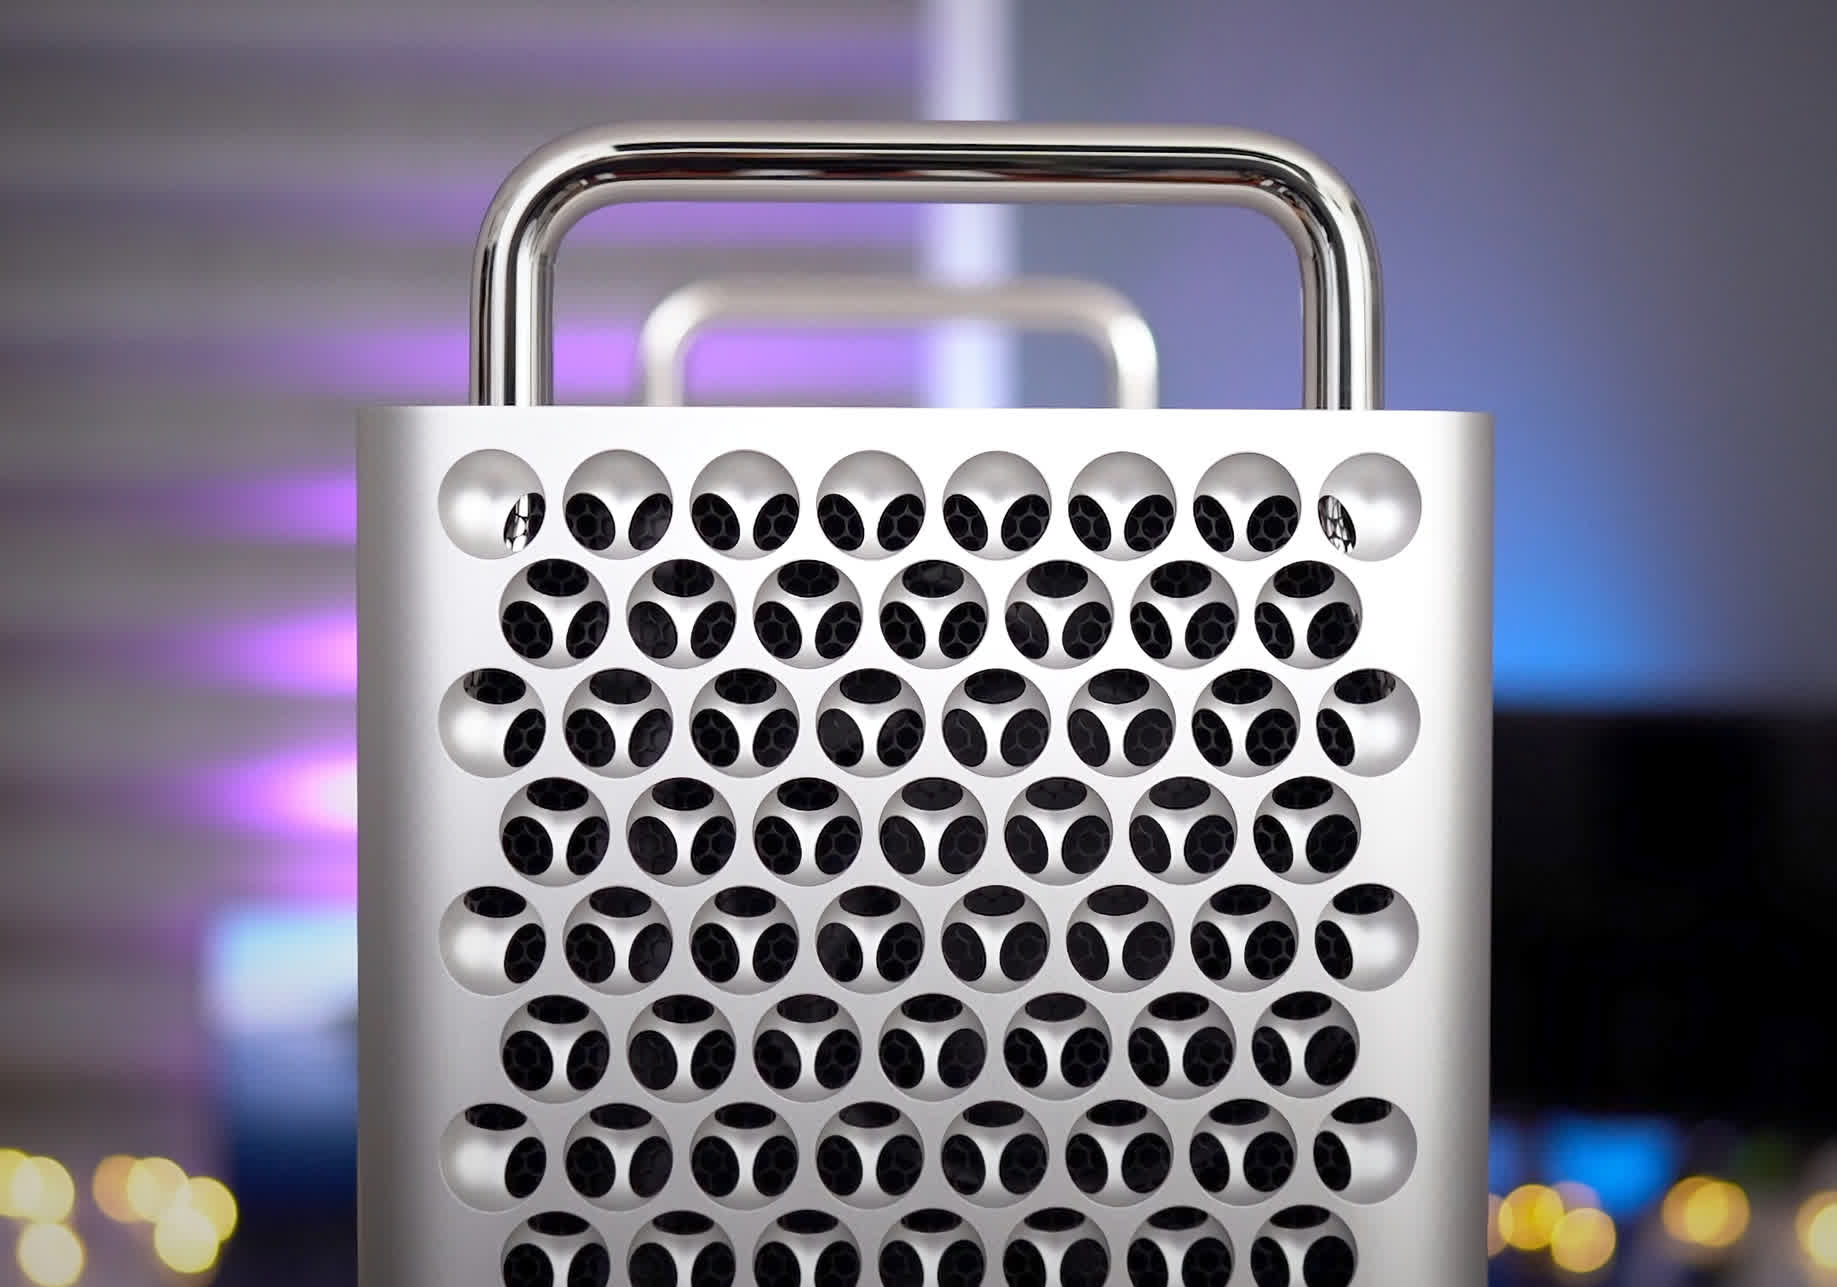 Apple said to be testing multiple Mac Pro configurations including one with 48 CPU cores